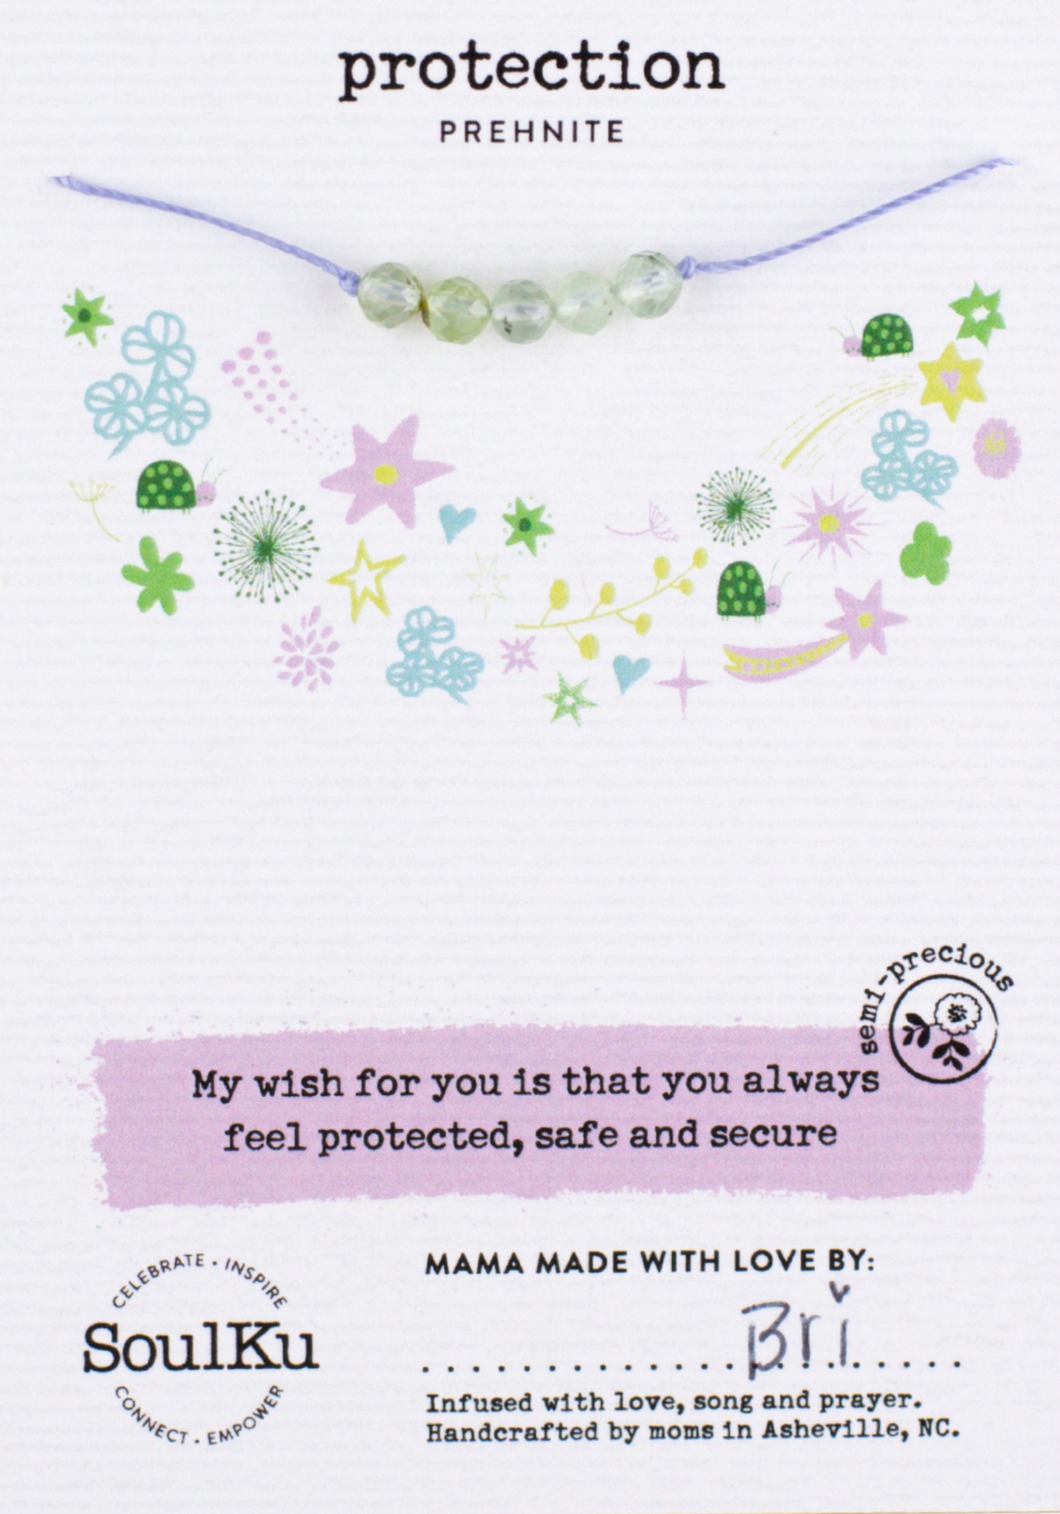 Prehnite Little Wishes Kids Necklace for Protection